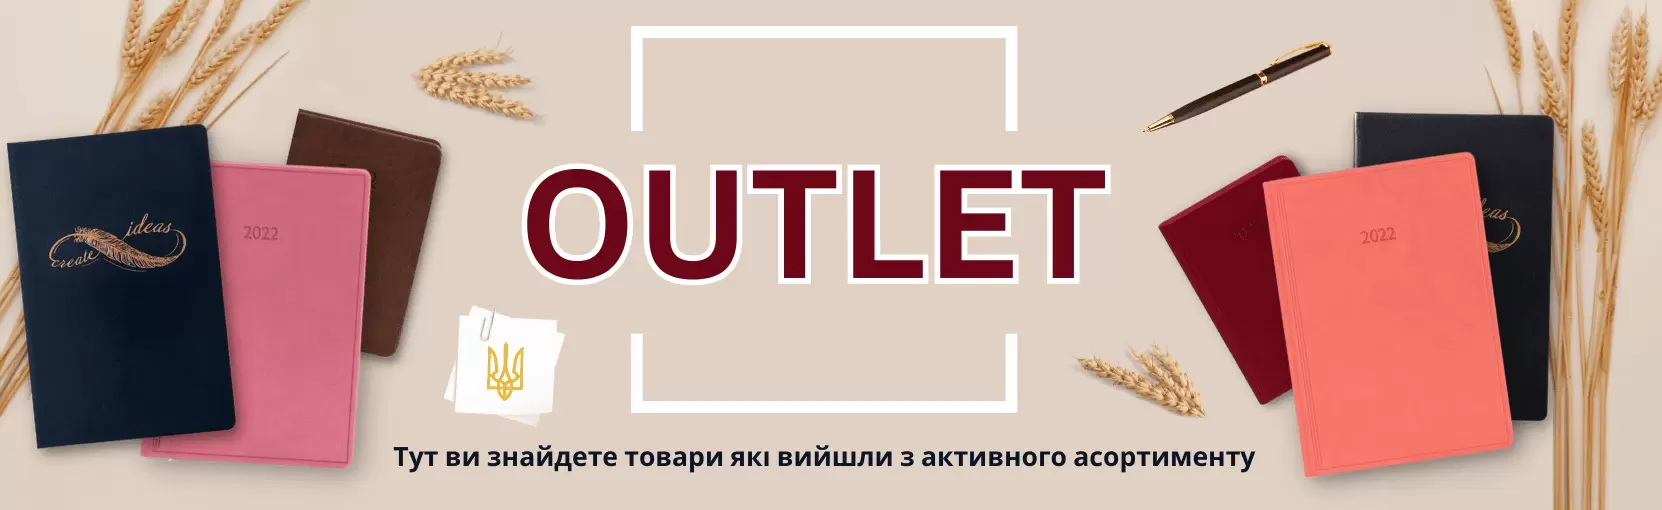 7_Outlet